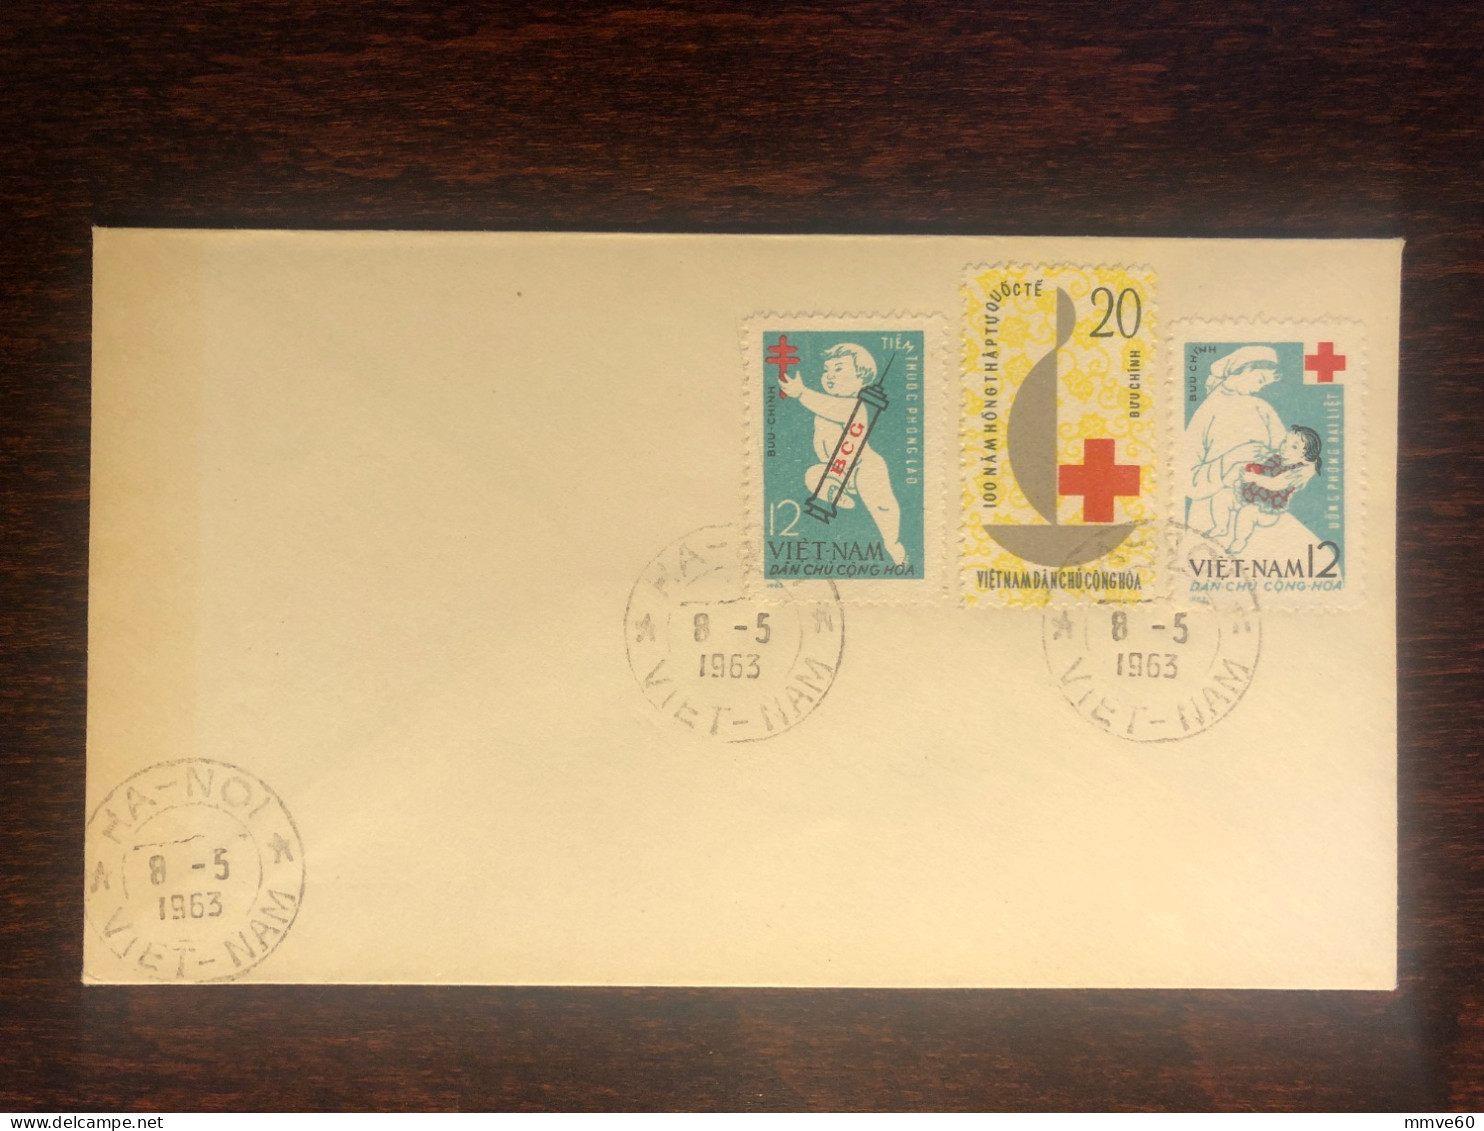 VIETNAM NORTH  FDC COVER 1963 YEAR RED CROSS TUBERCULOSIS BCG HEALTH MEDICINE STAMPS - Vietnam